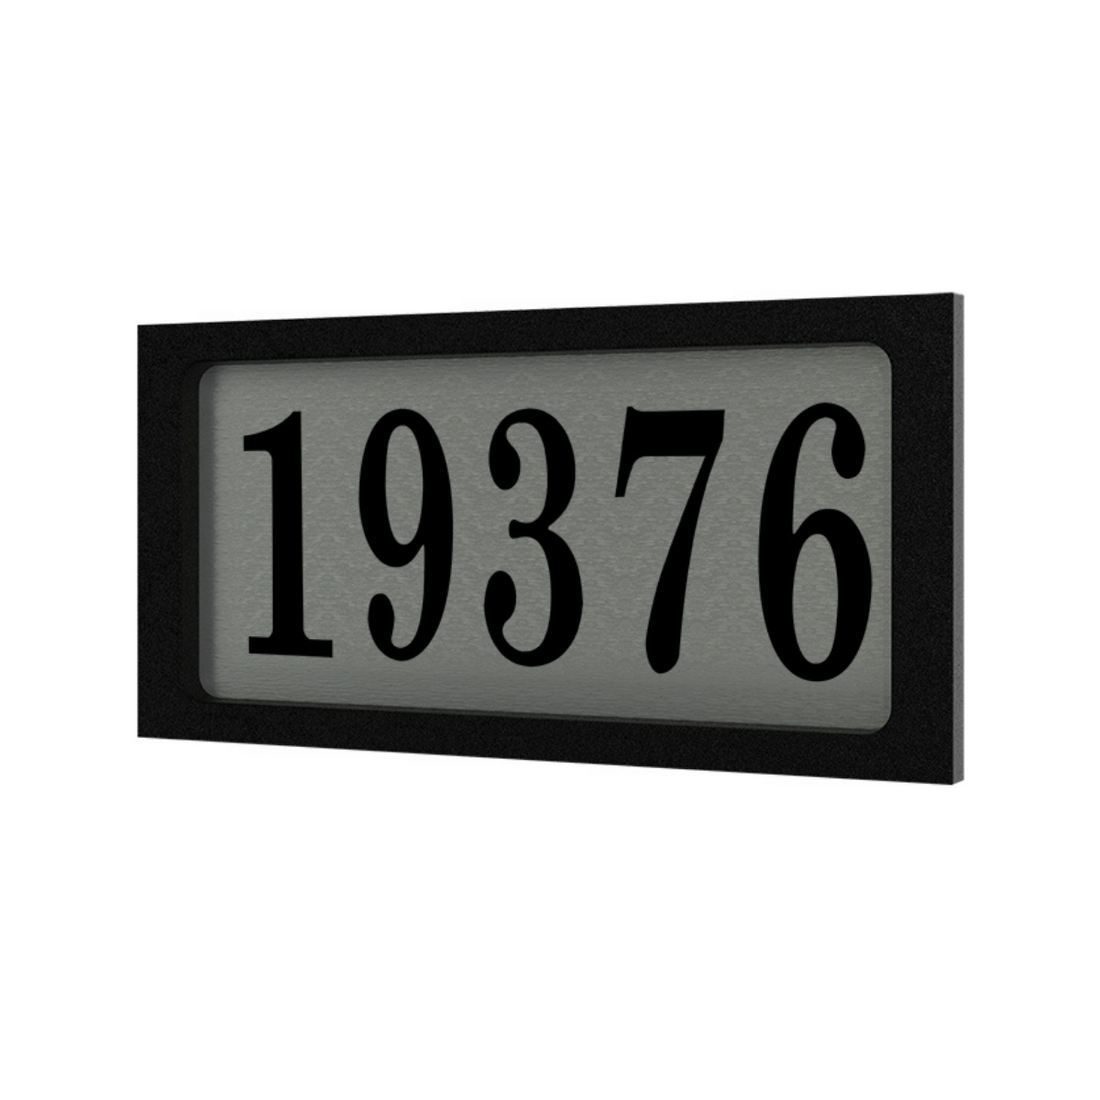 Tampa - Stainless steel address plaque - 1732